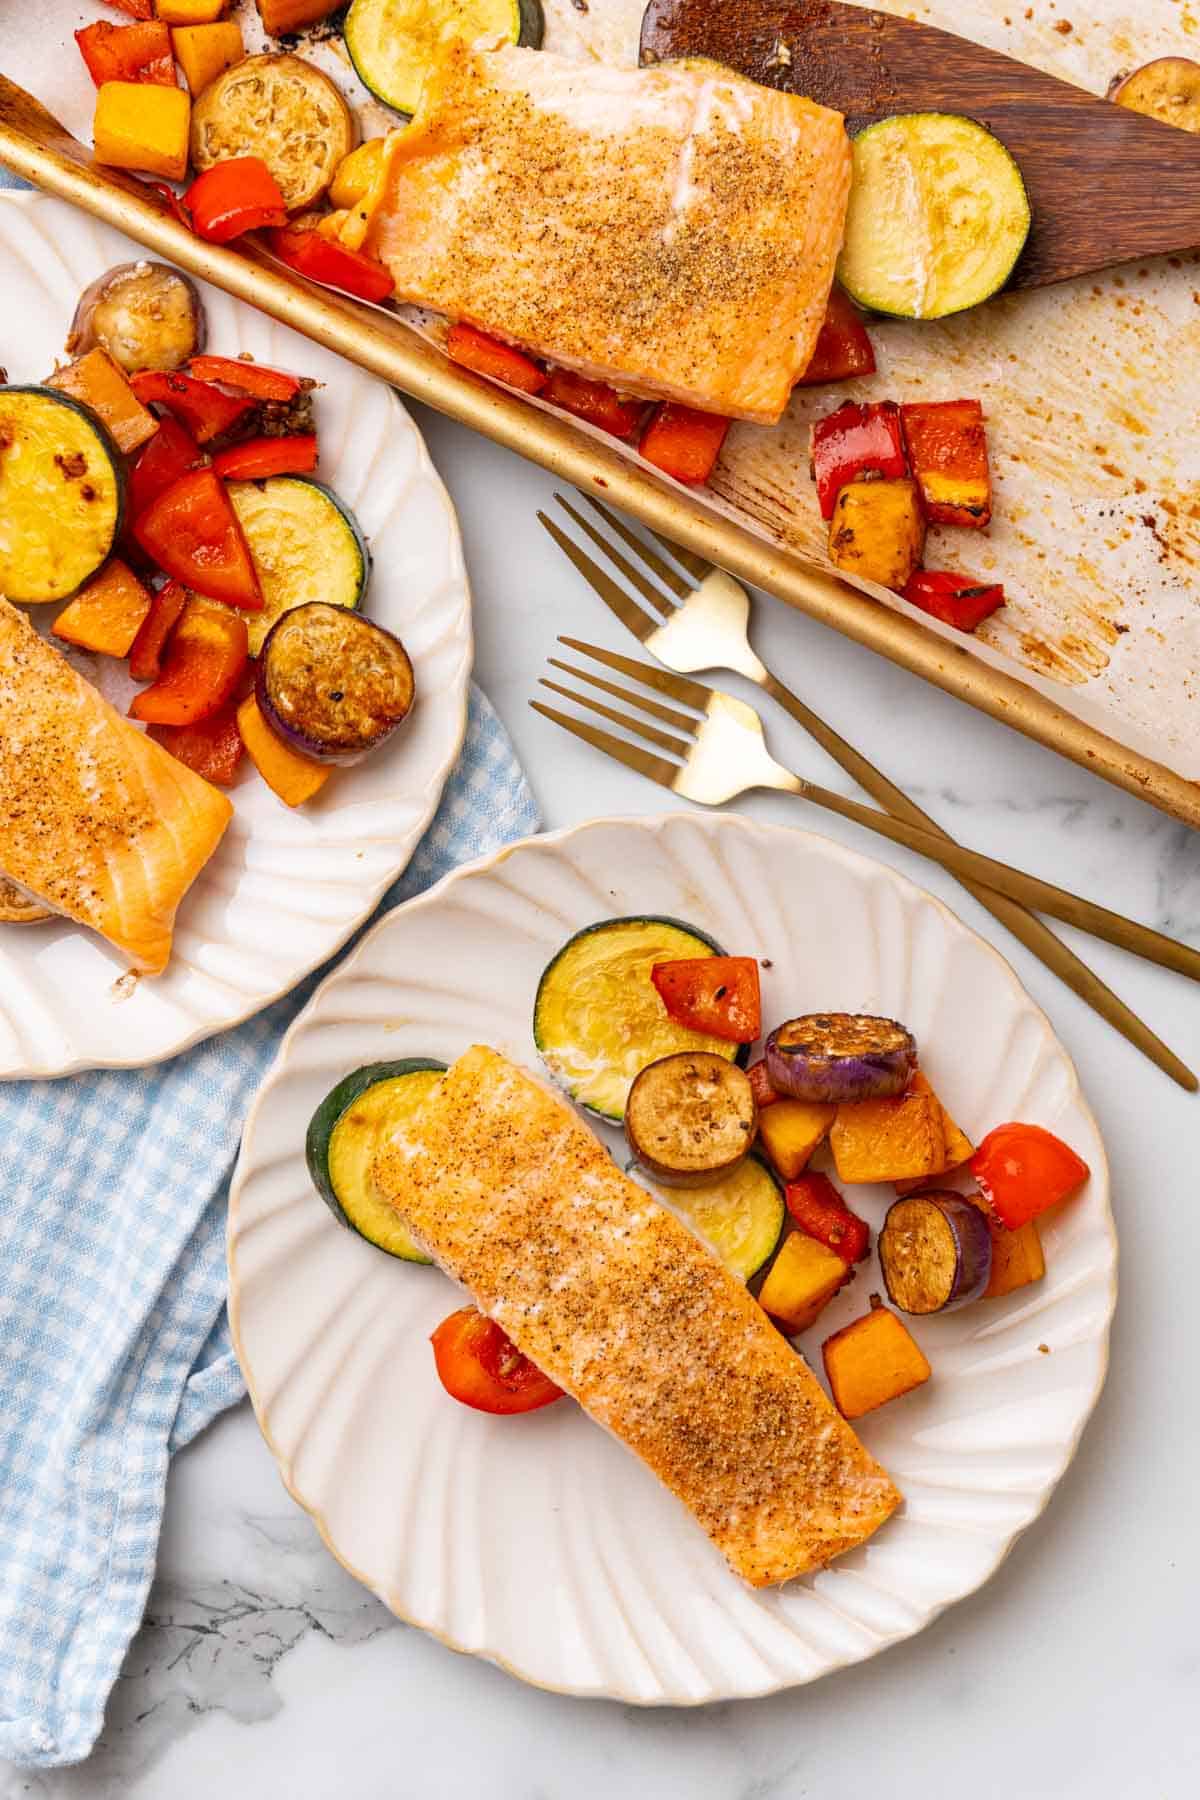 Overhead view of two plates of salmon with roasted veggies next to two gold forks and a baking tray with more salmon and veggies